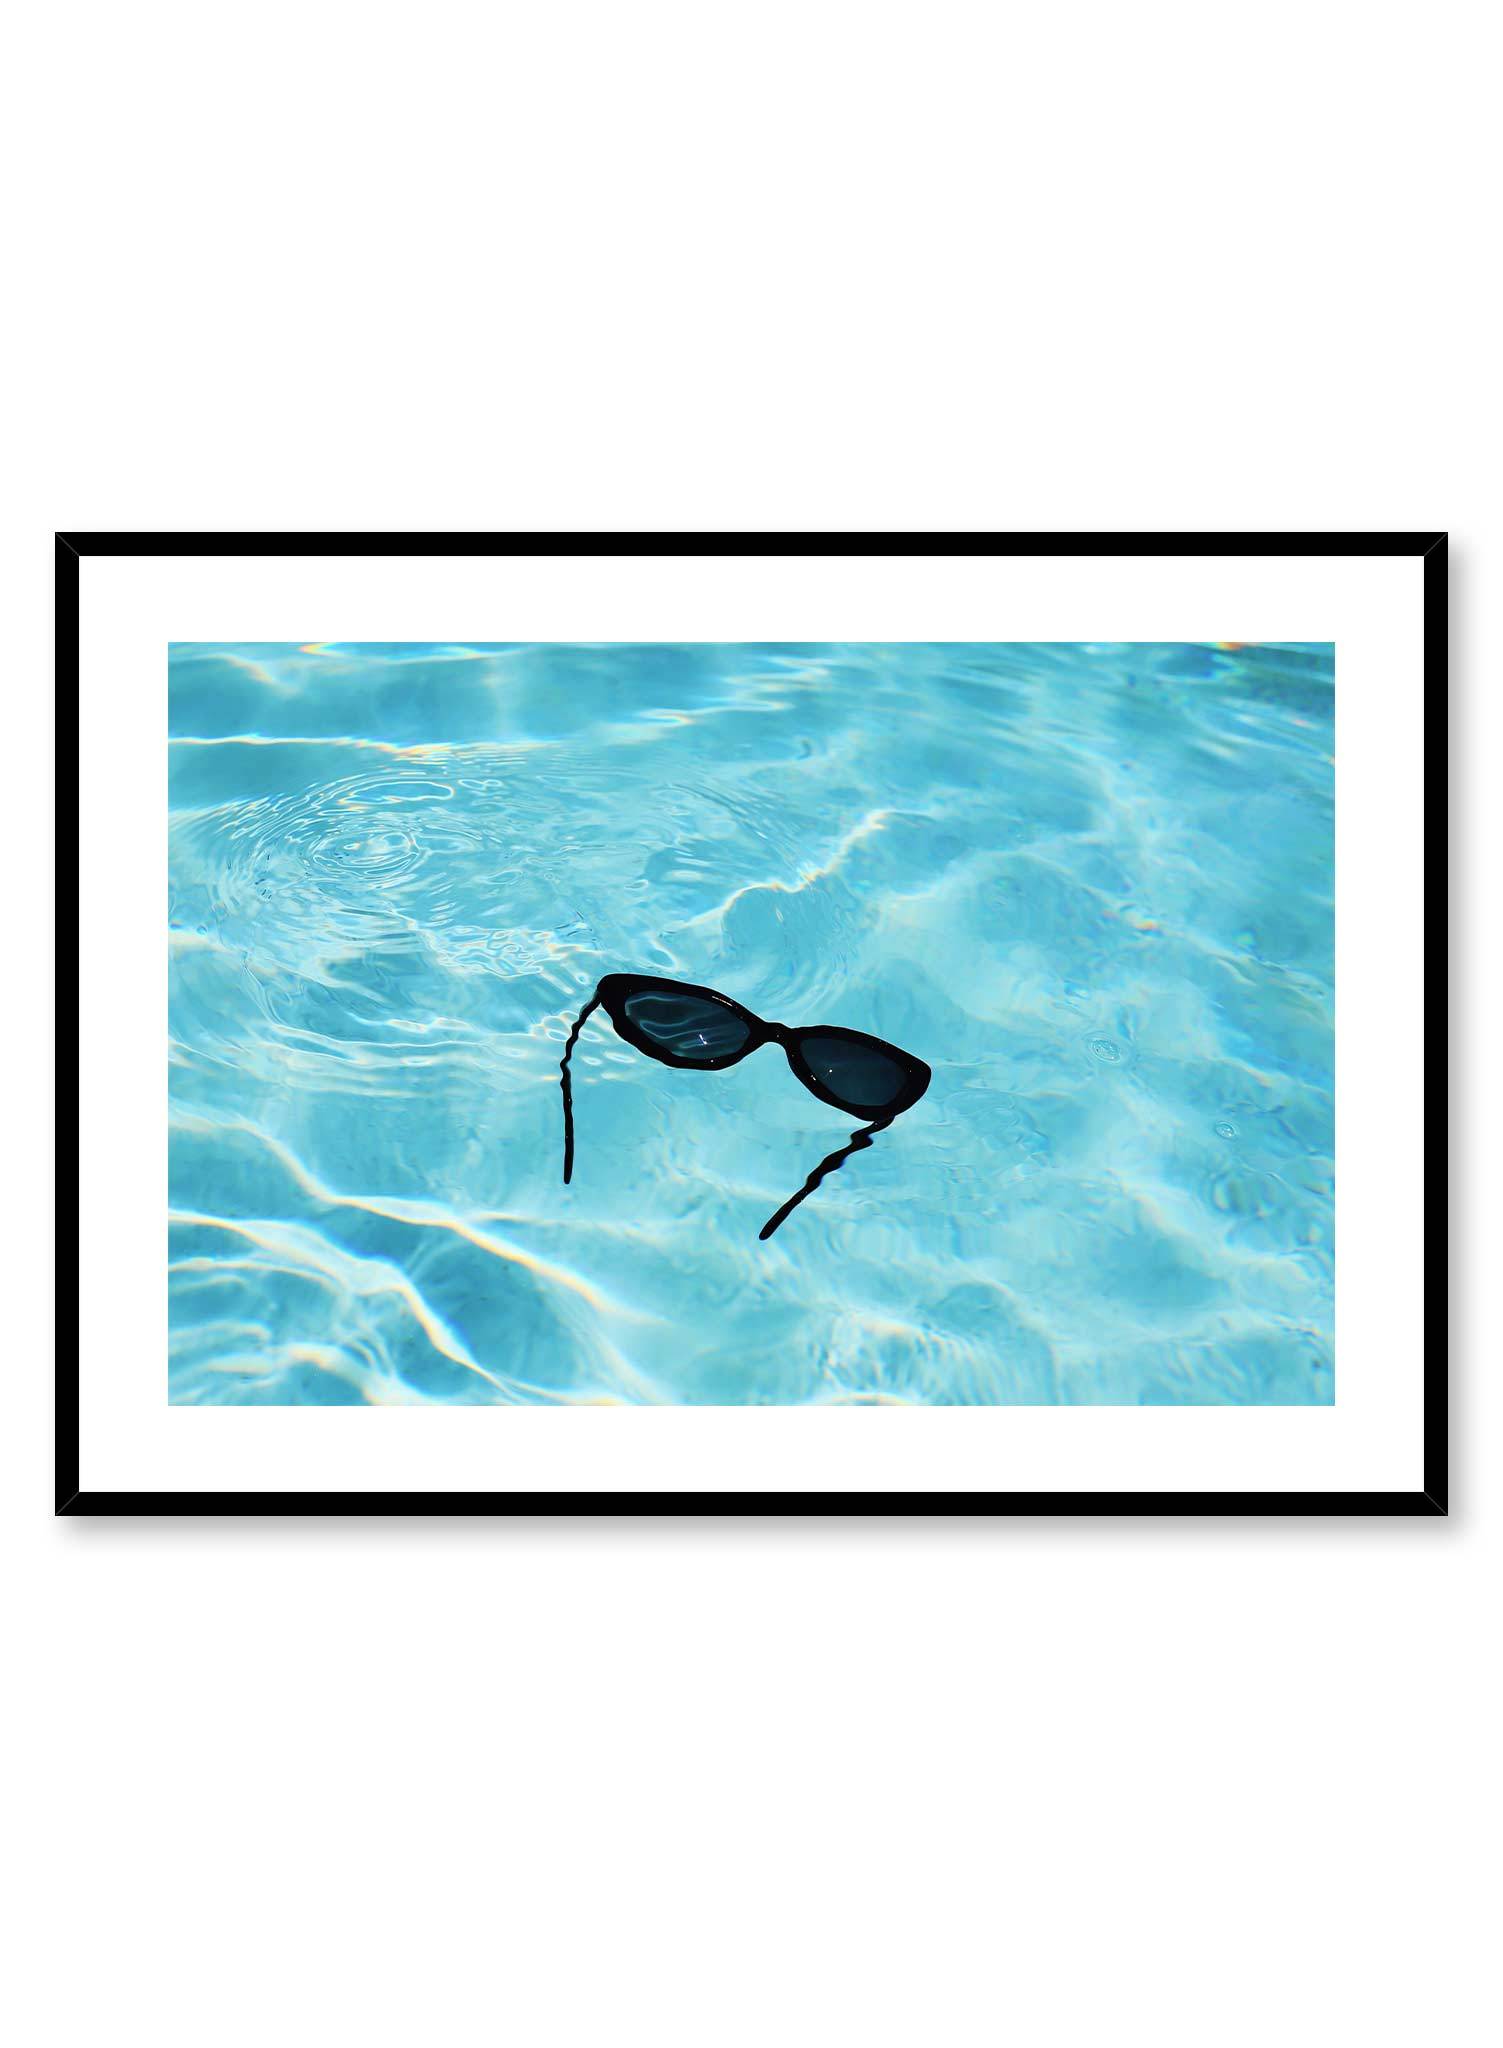 Floating Shades | Pool Fallen Sunglasses Photography by Opposite Wall